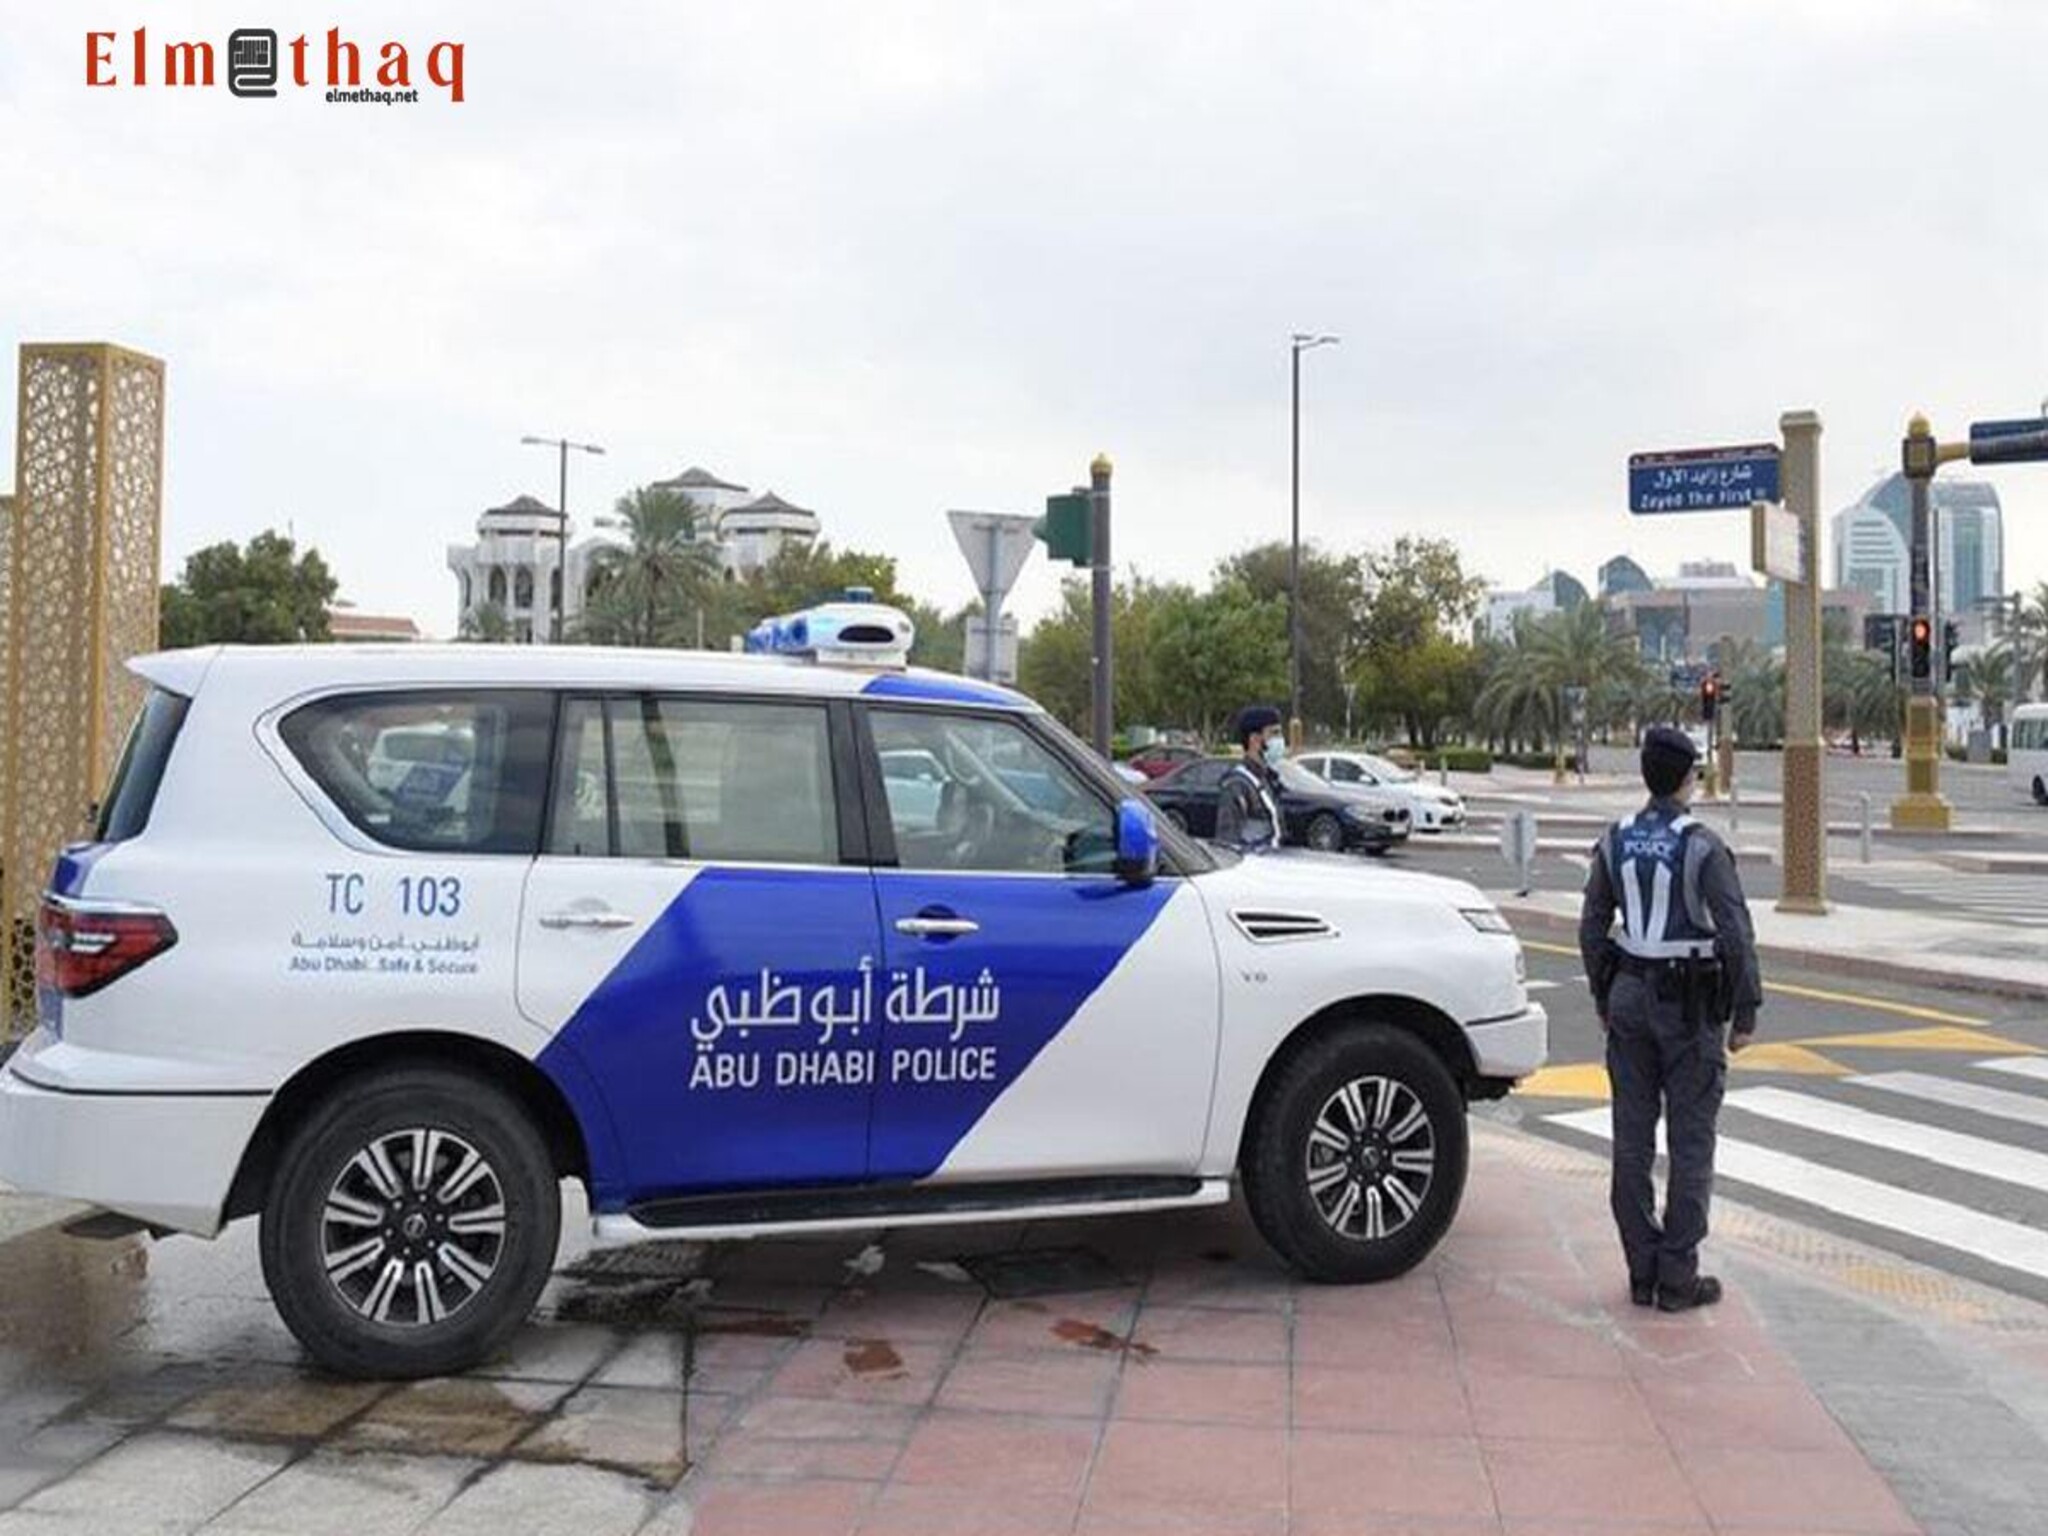 UAE Police announces the launch of smart bus to combat drug abuse in Abu Dhabi